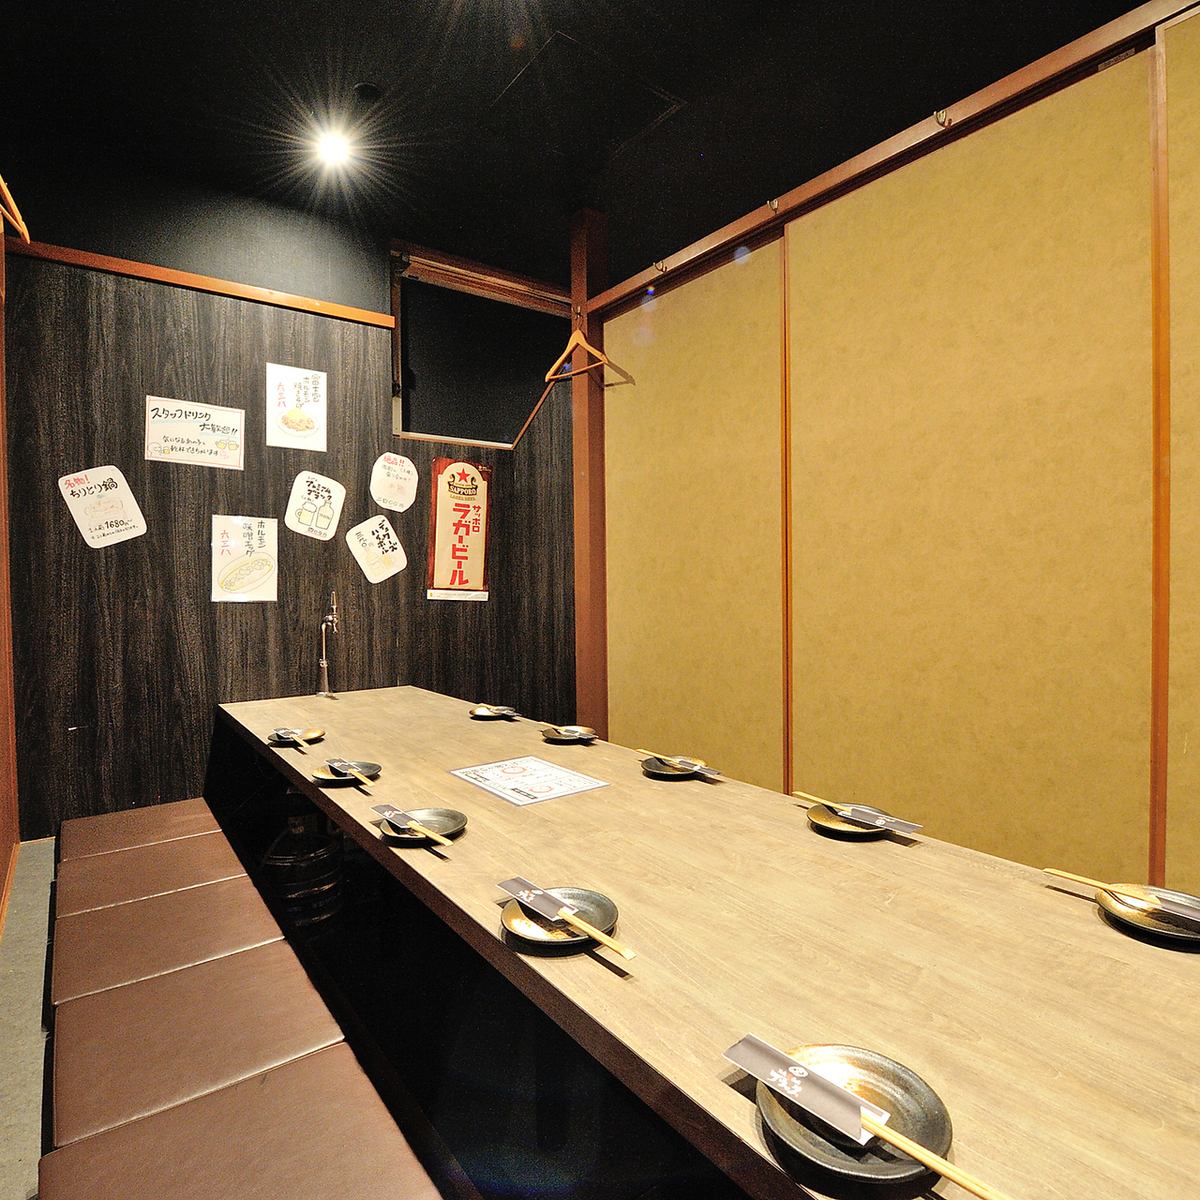 [3 minutes from Umeda ♪ Opens at 16:00] Completely large number of pieces ★ Courses for banquets start from 3,500 yen